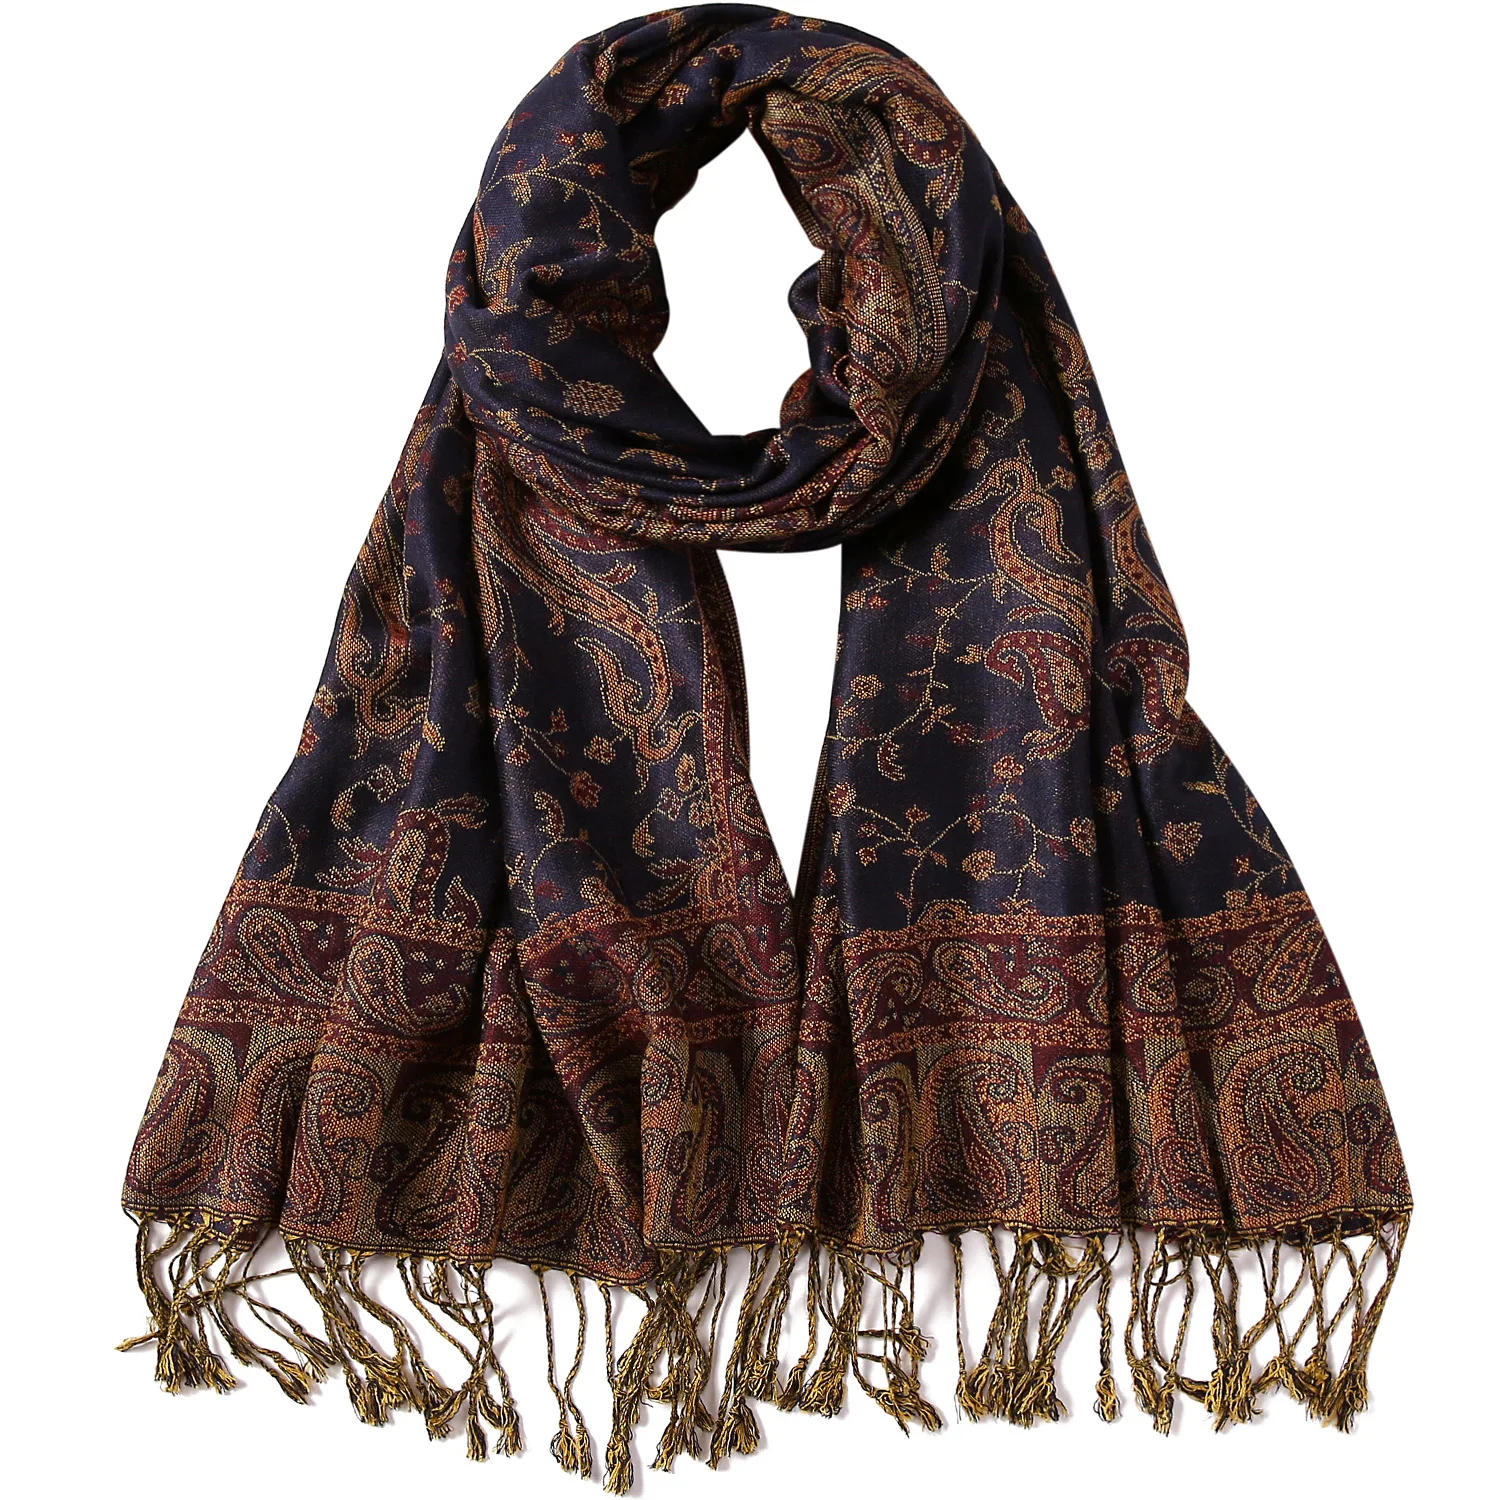 Traditional Shawl Women Head Wraps Reversible Vintage Style Jacquard Navy Red Paisley Scarves for Women Festival Scarf Rave Pashmina